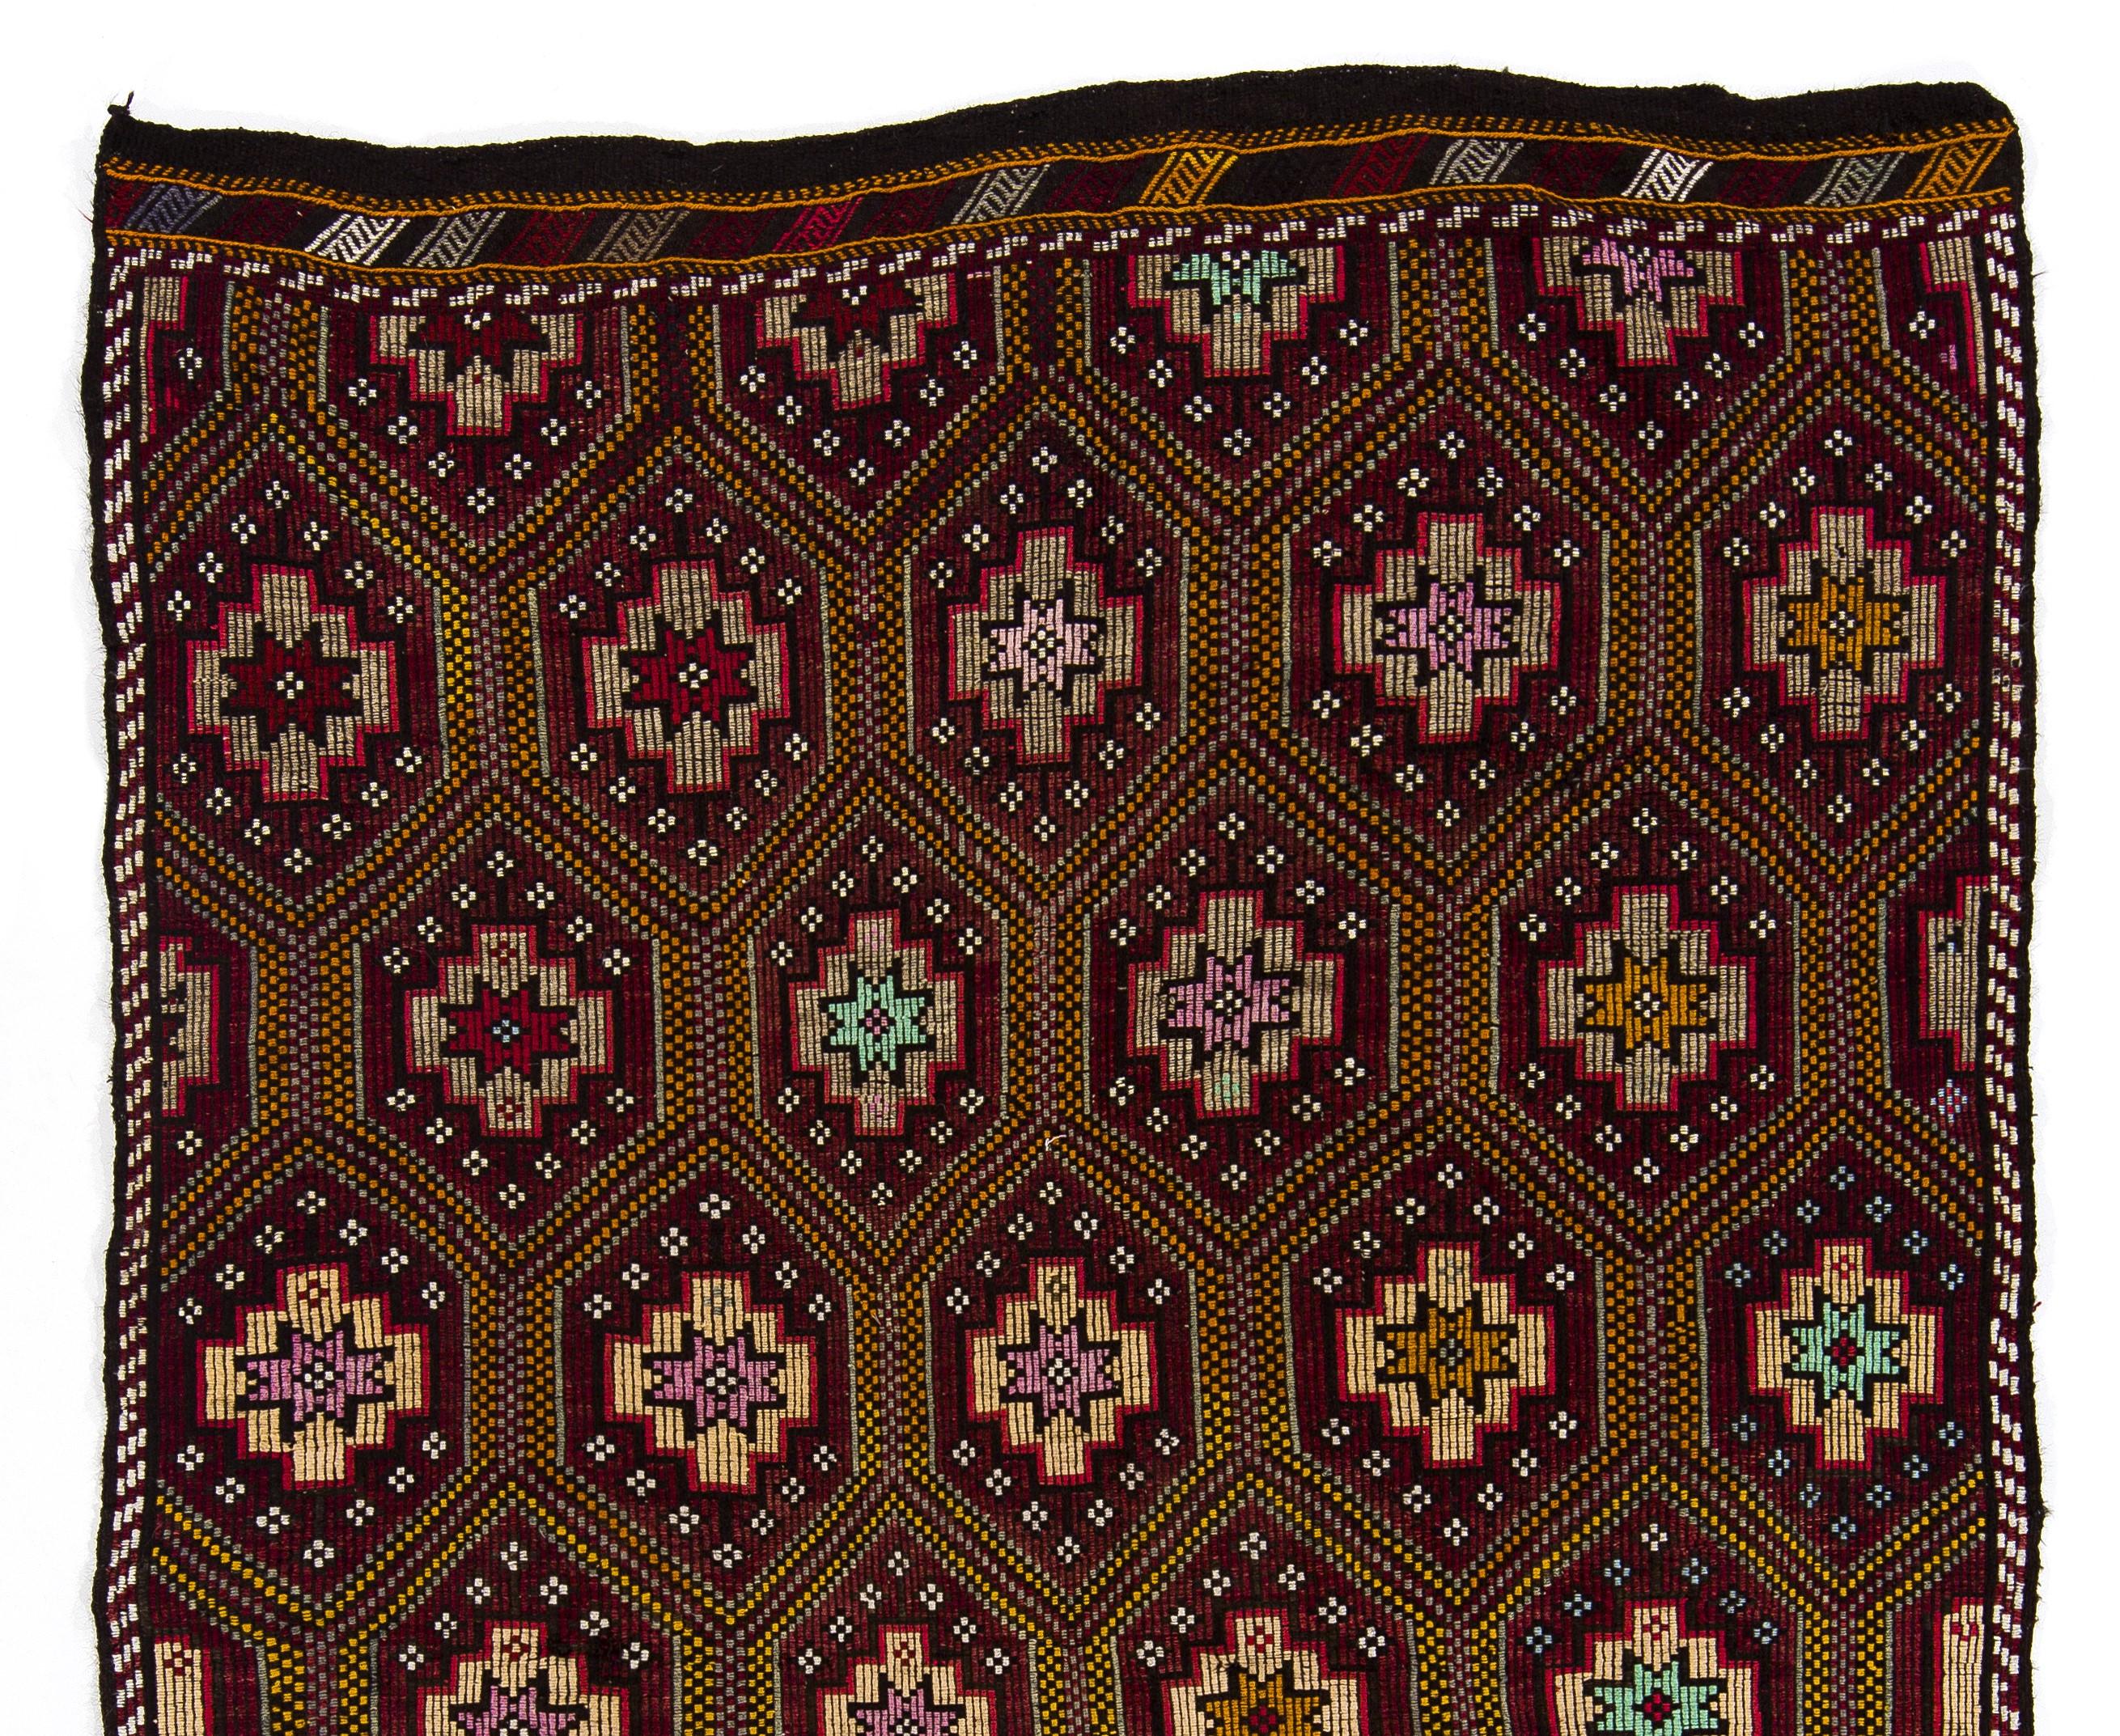 This type of Kilims (flat-woven rugs) were produced by nomads in South Central Turkey around midcentury for daily use in their tents rather than re-sale or export purposes and today they are very popular in western interior design world for their